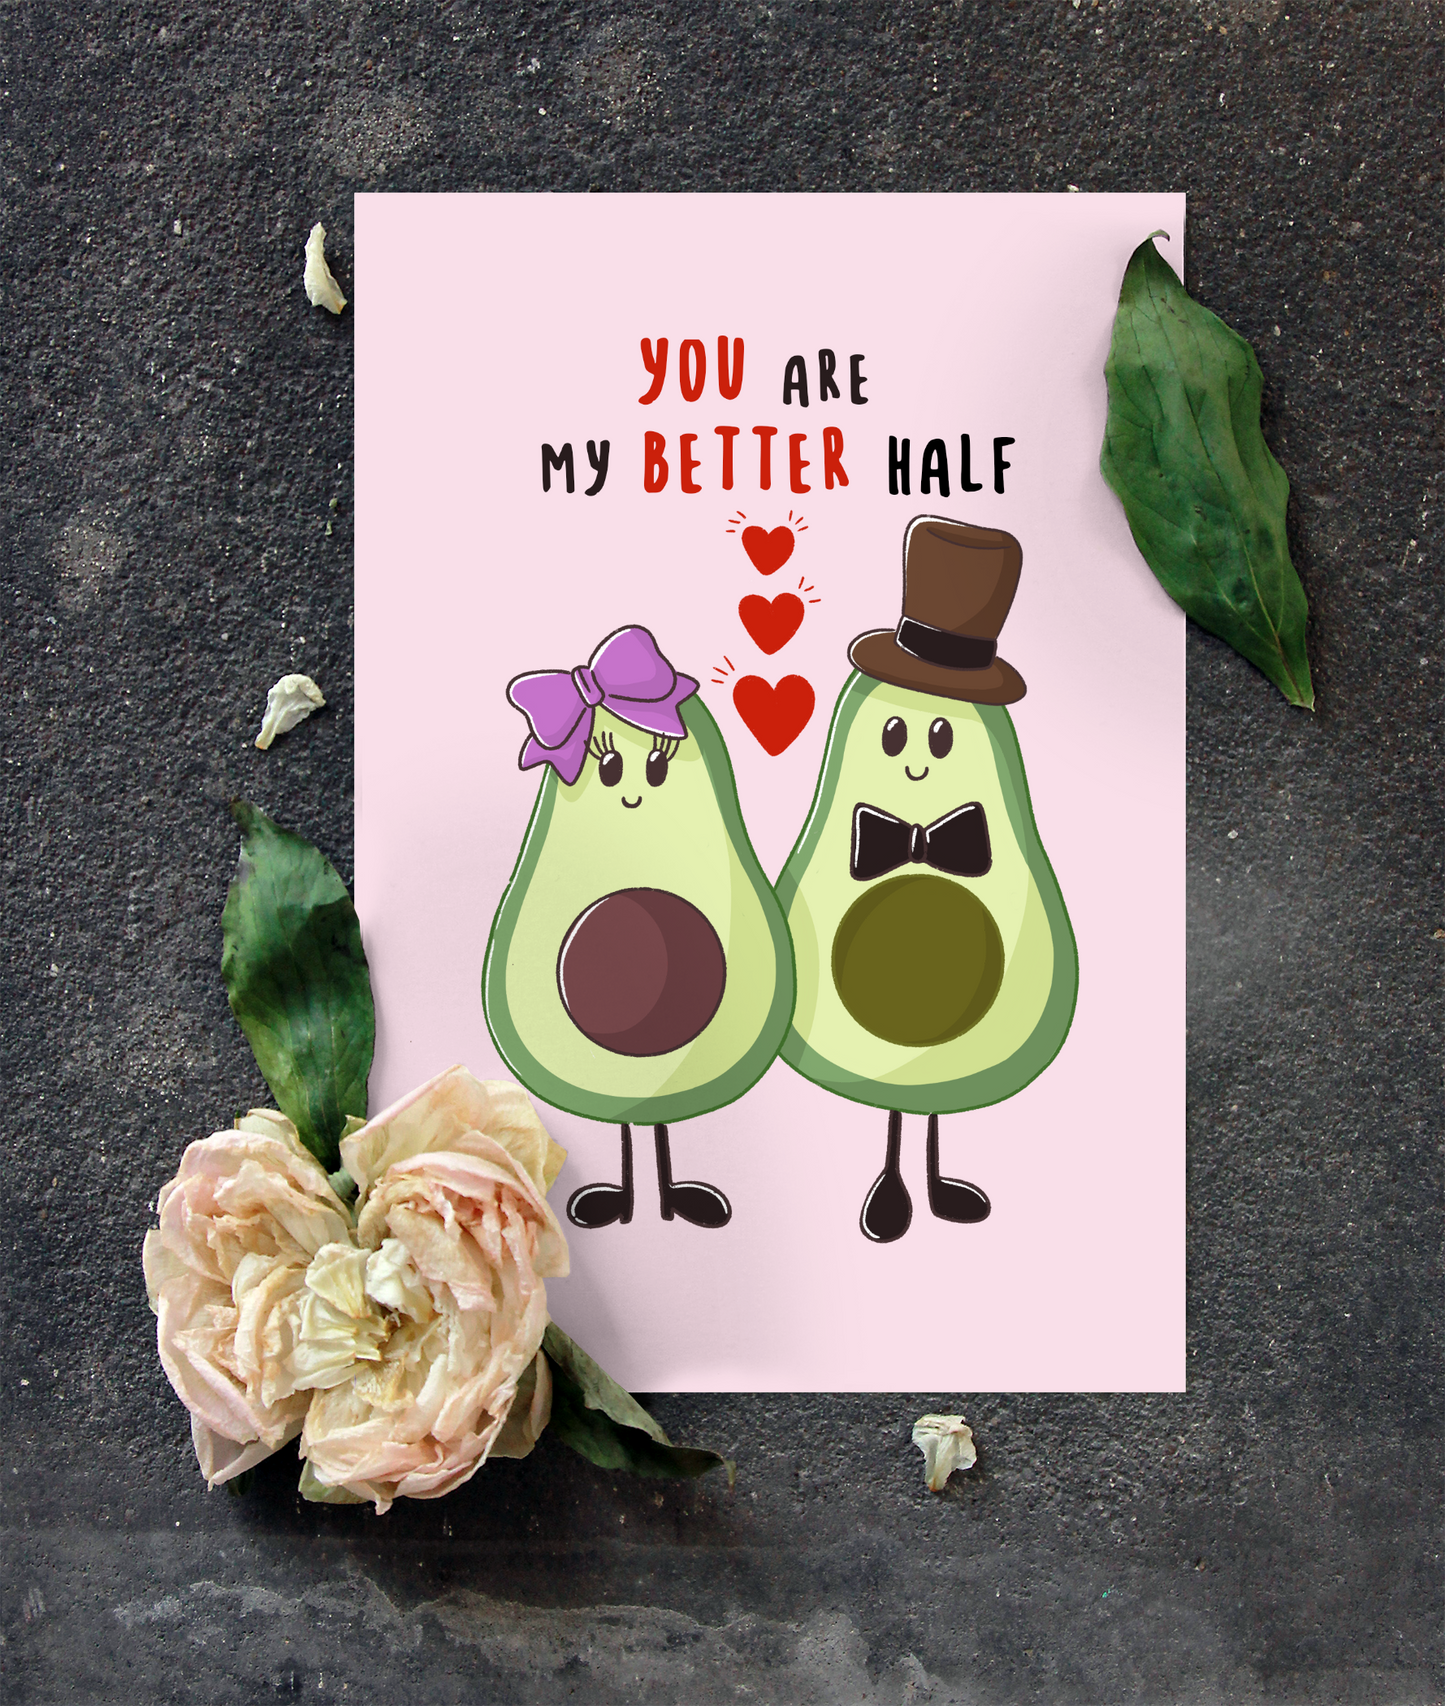 You are my better half - Valentine's day card